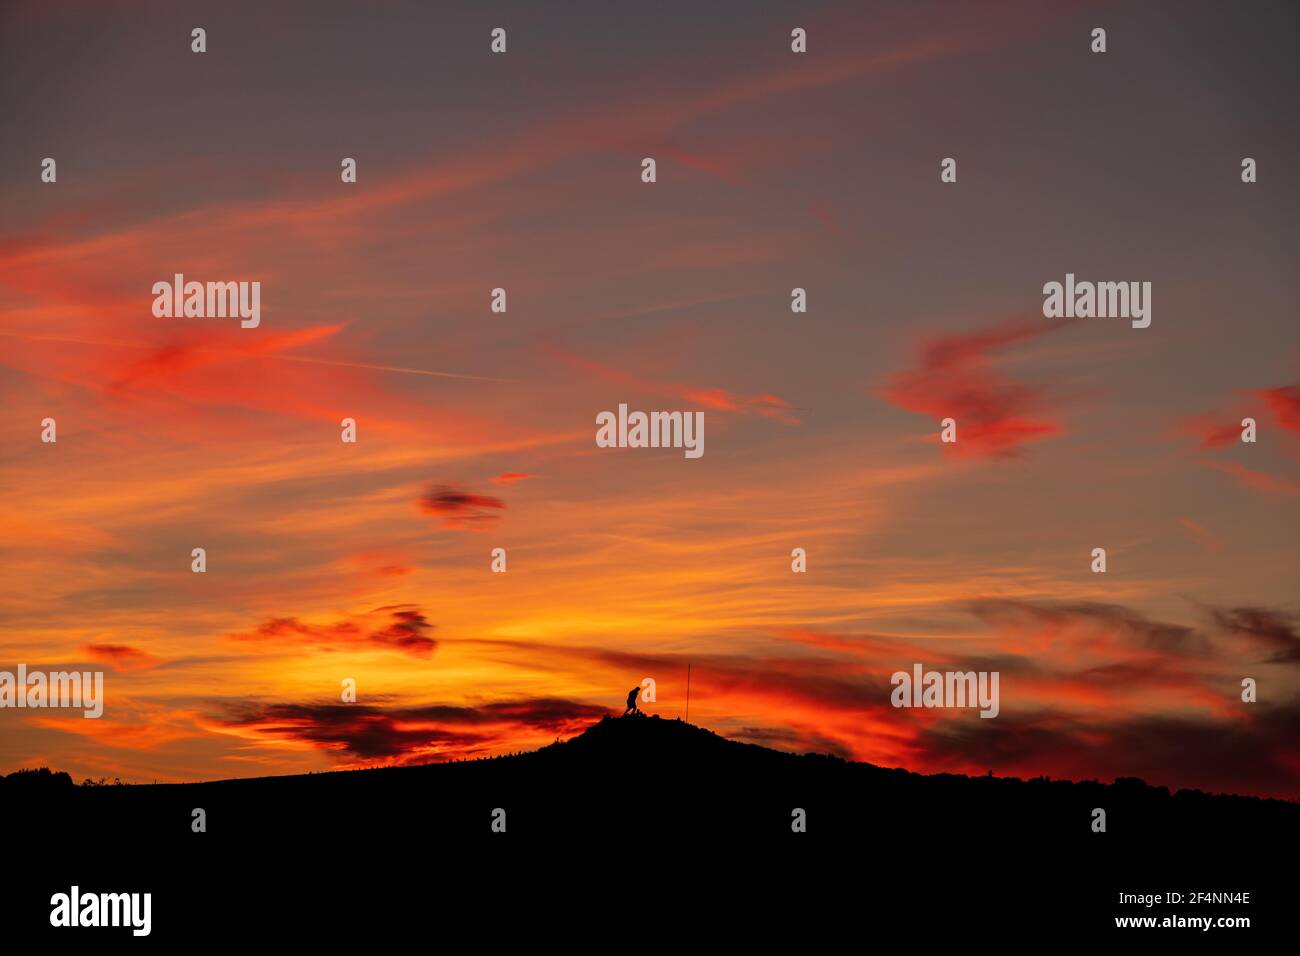 Ataturk silhouette. Climb the mountain with a magnificent cloudy sky sunset. Stock Photo